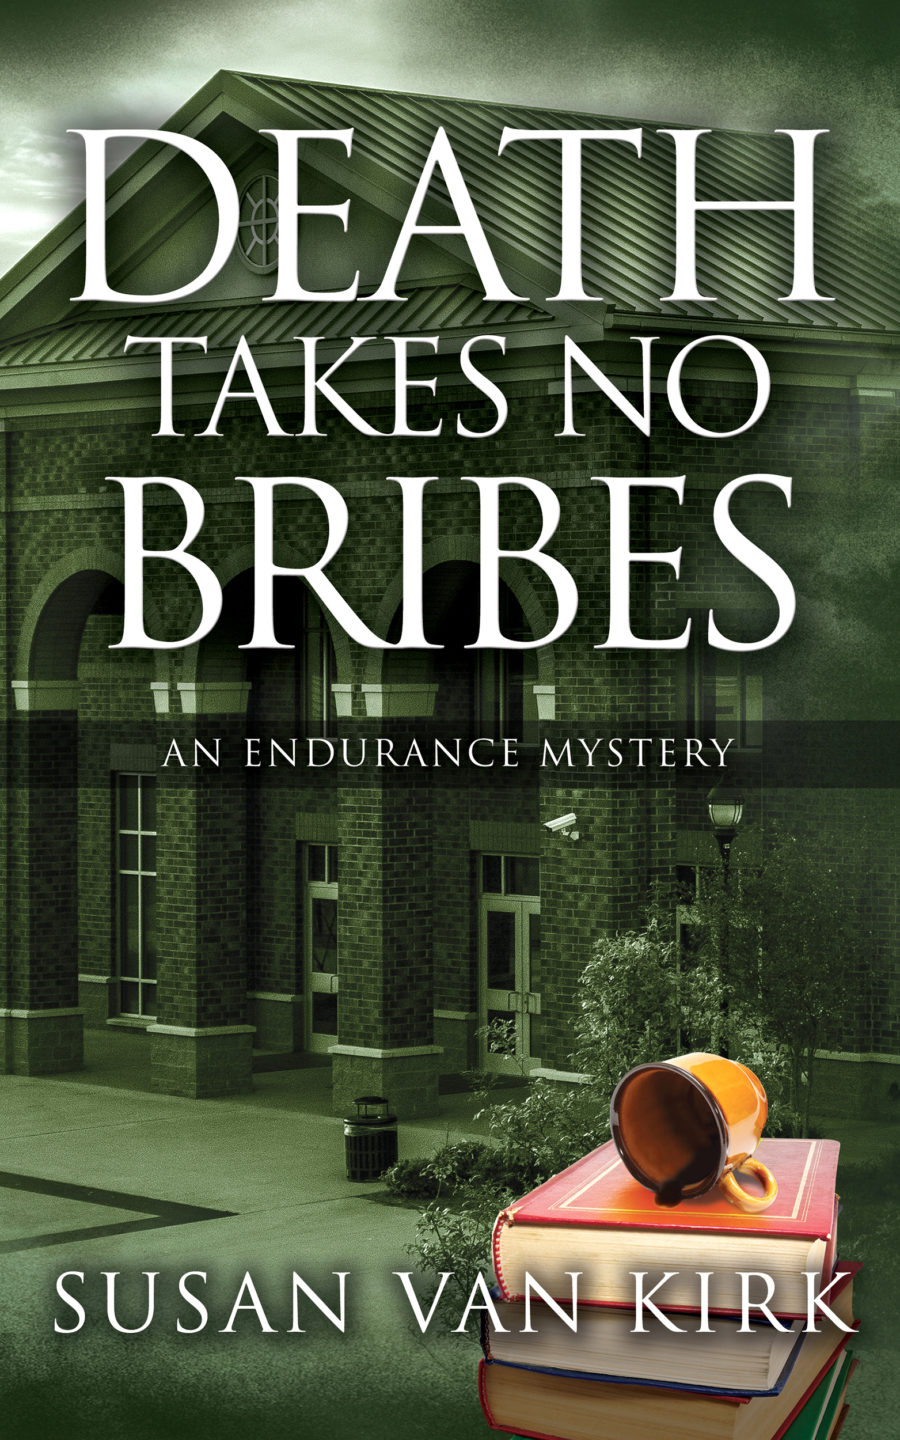 Book cover of "Death Takes No Bribes"